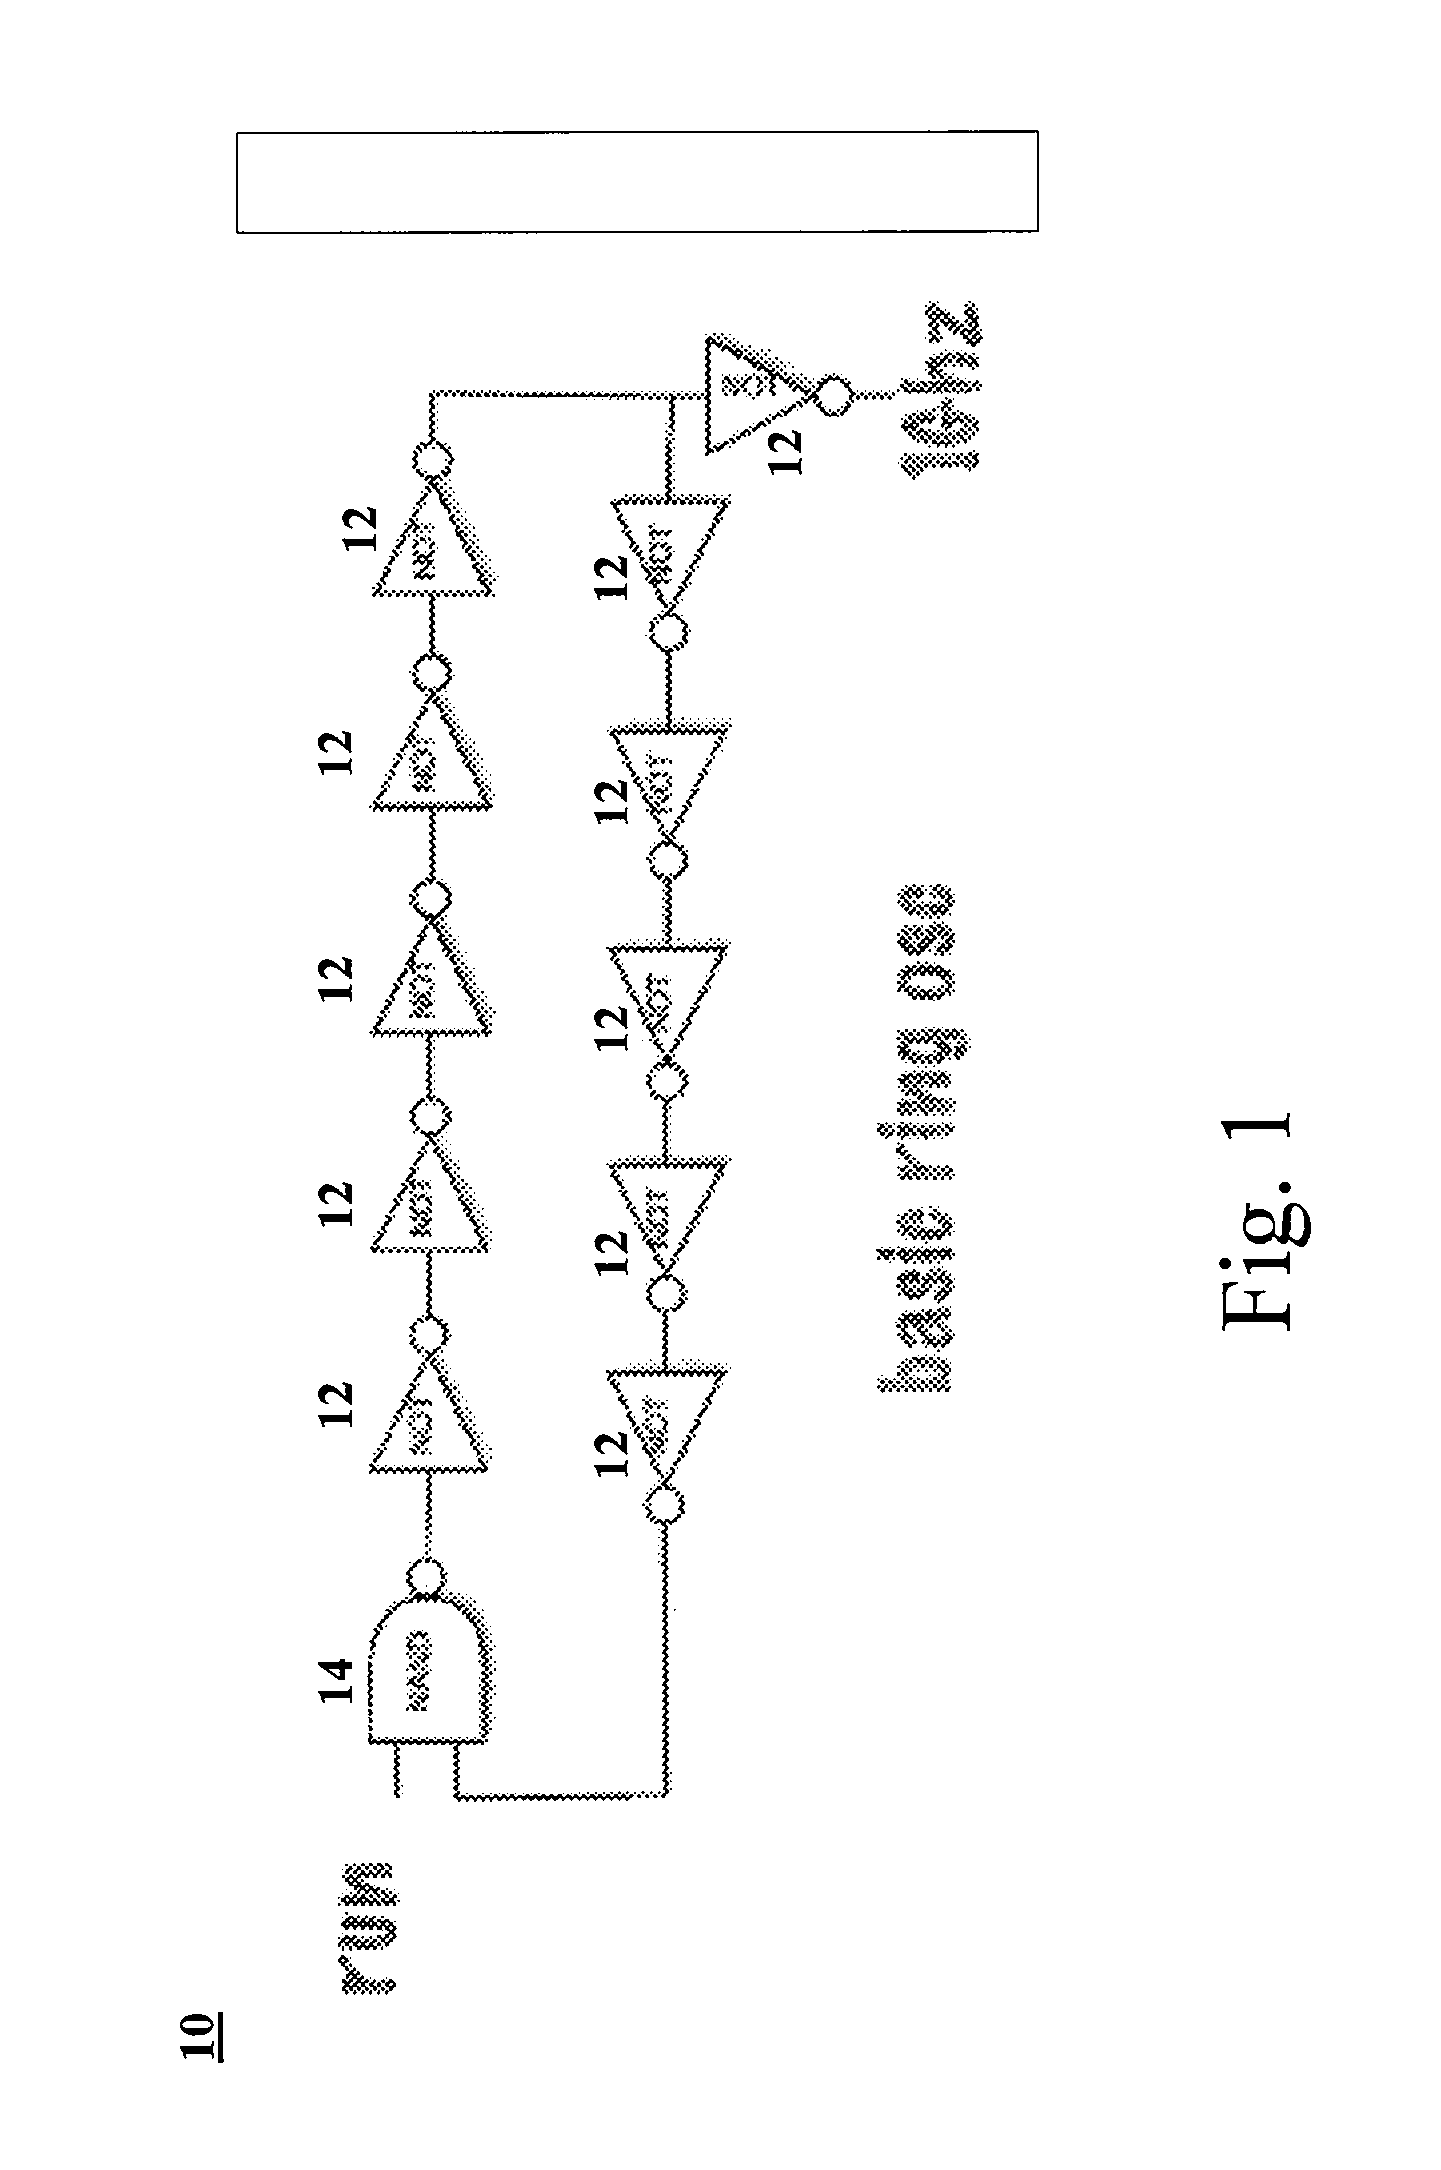 Clock generator including a ring oscillator with precise frequency control